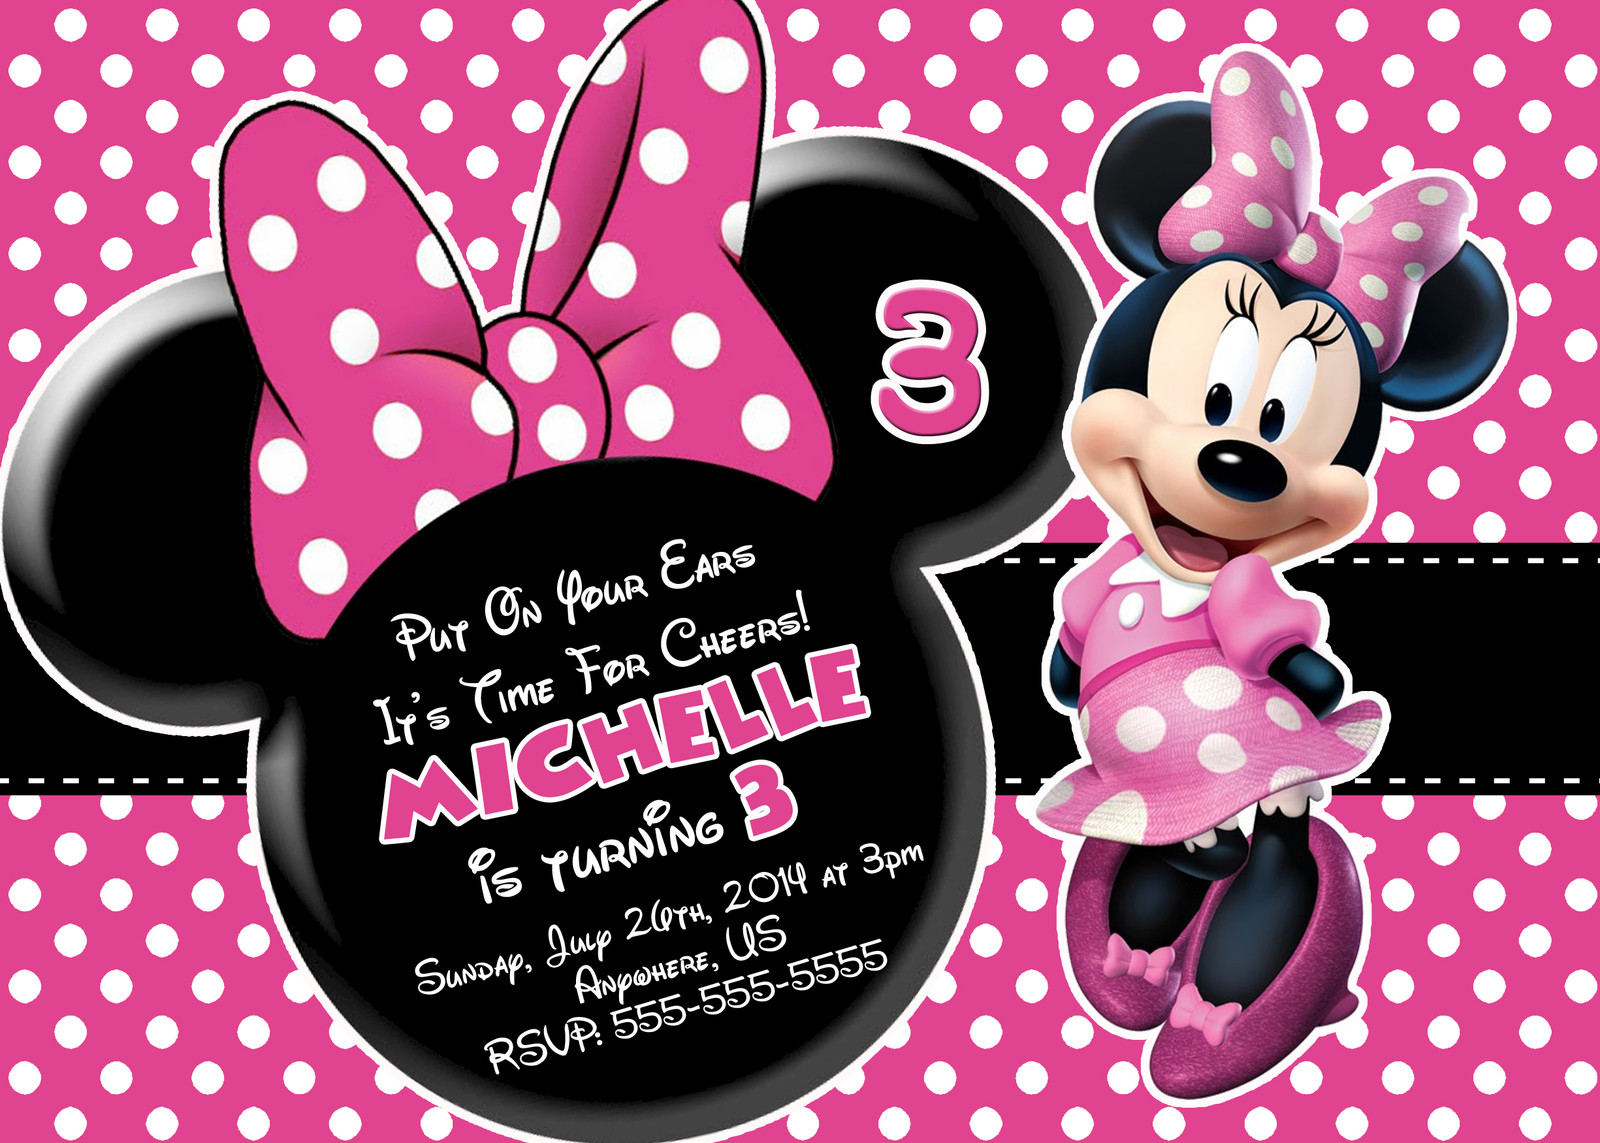 Minnie Mouse Birthday Invitations Personalized
 Minnie Mouse Printable Birthday Invitations – FREE